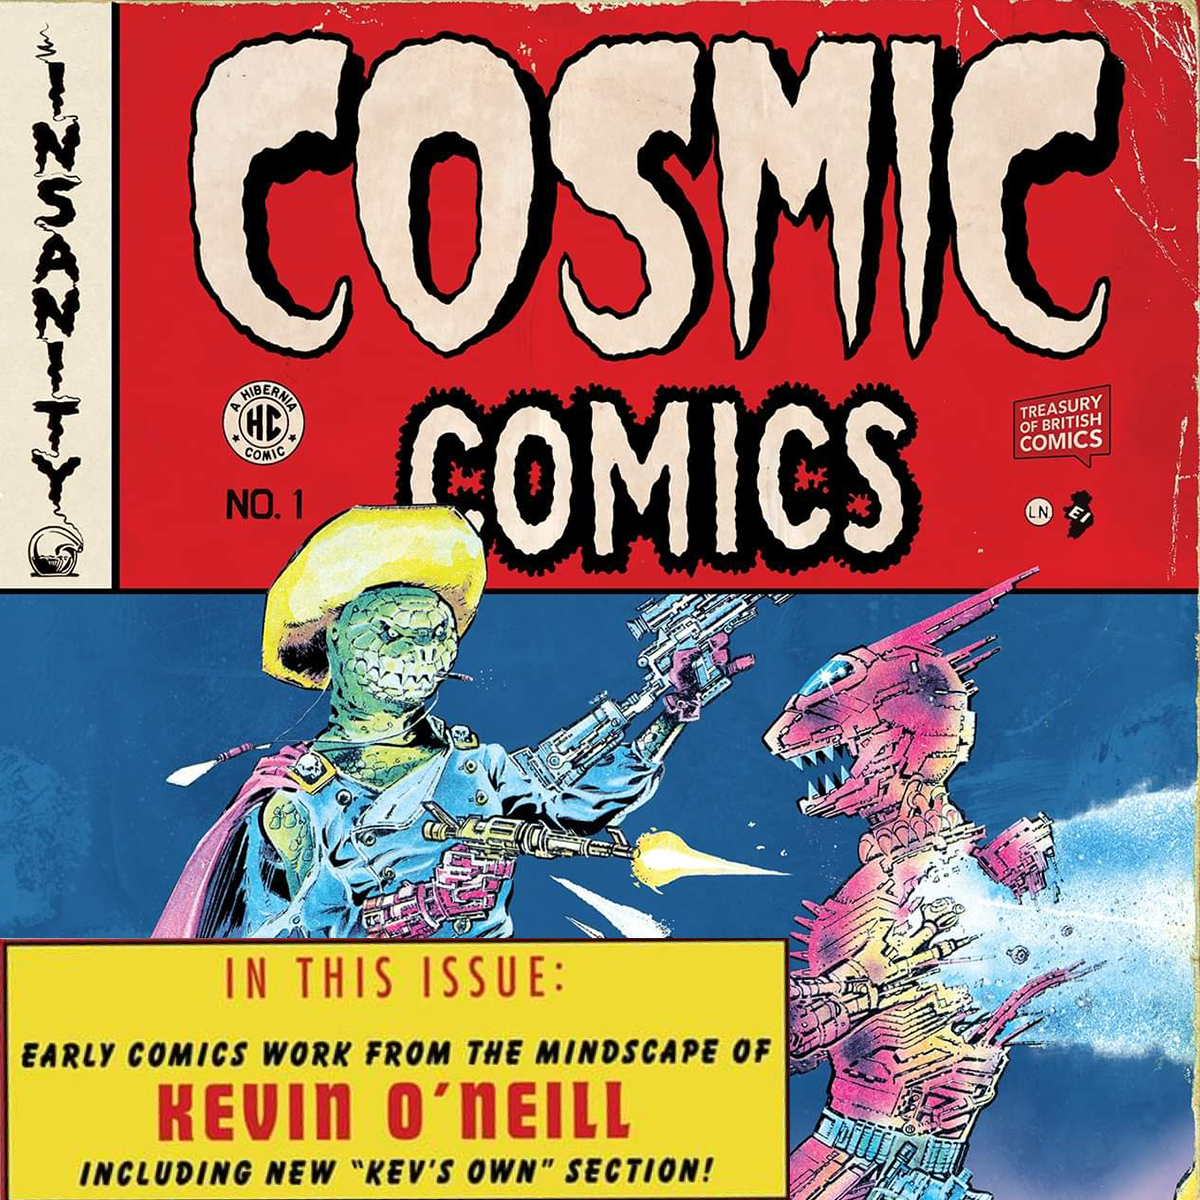 OUT NOW: Cosmic Comics is back, with an extra 28 pages from legendary creator Kevin O’Neil!